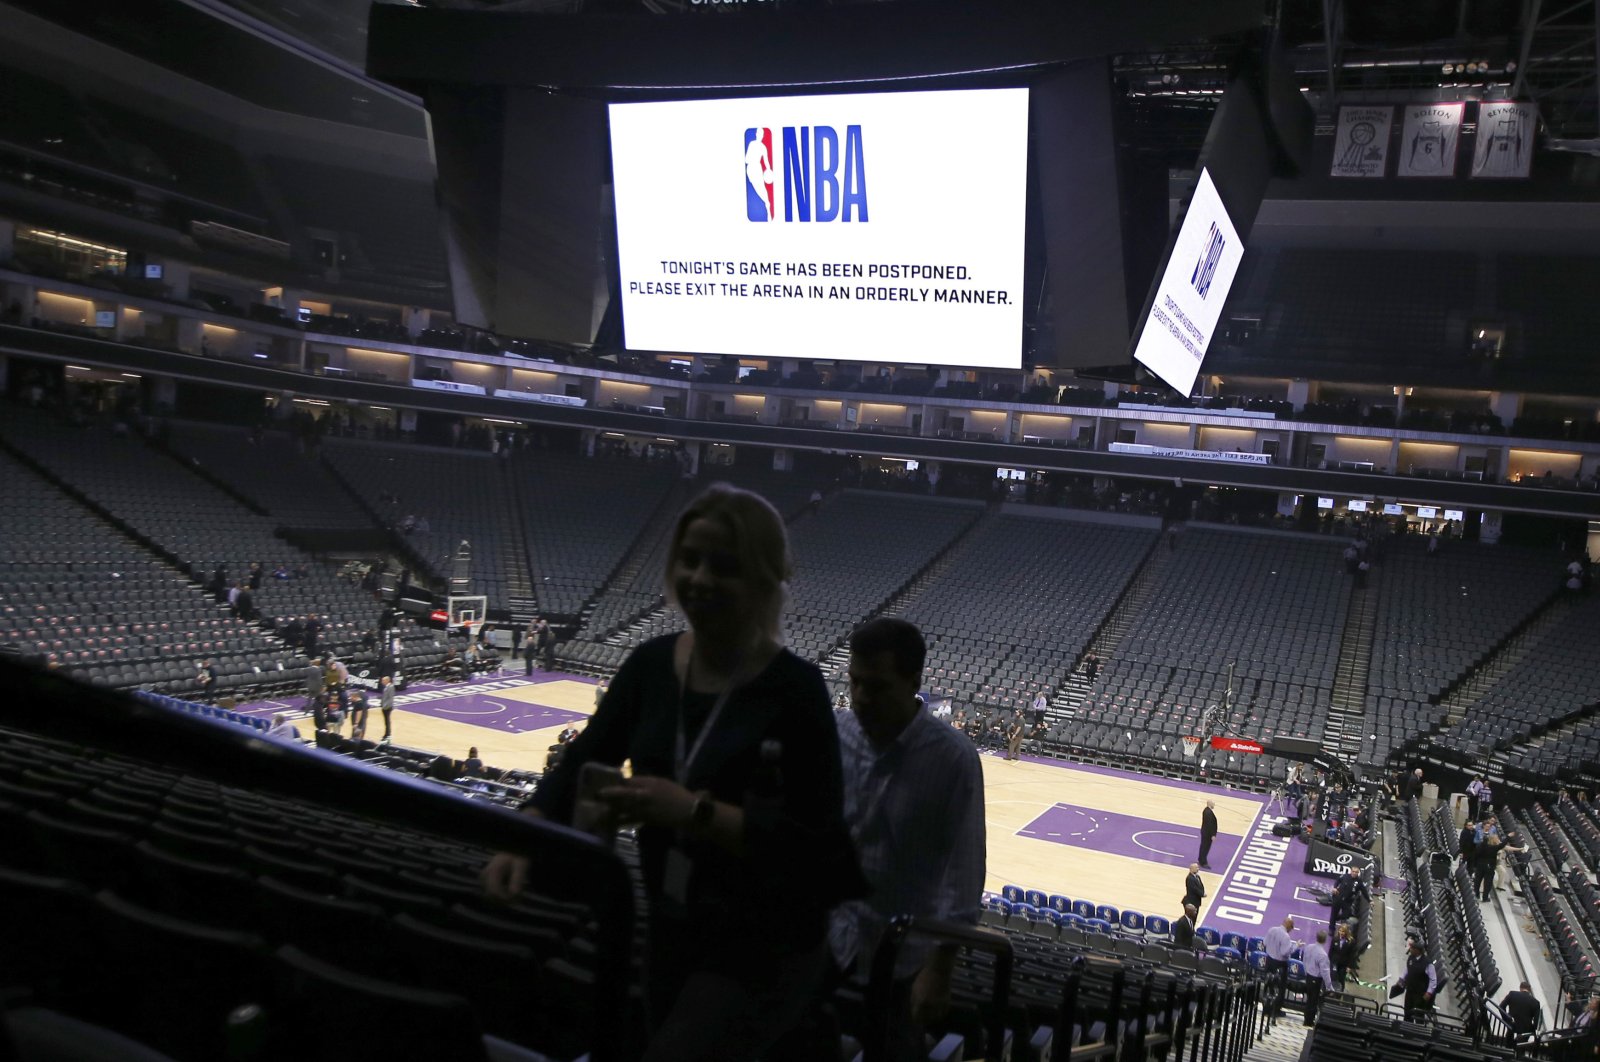 Fans leave the Golden 1 Center in Sacramento, Calif. after the NBA basketball game between the New Orleans Pelicans and Sacramento Kings was postponed at the last minute over an "abundance of caution" after a player for the Jazz tested positive for the coronavirus, March 11, 2020 photo. (AP Photo)